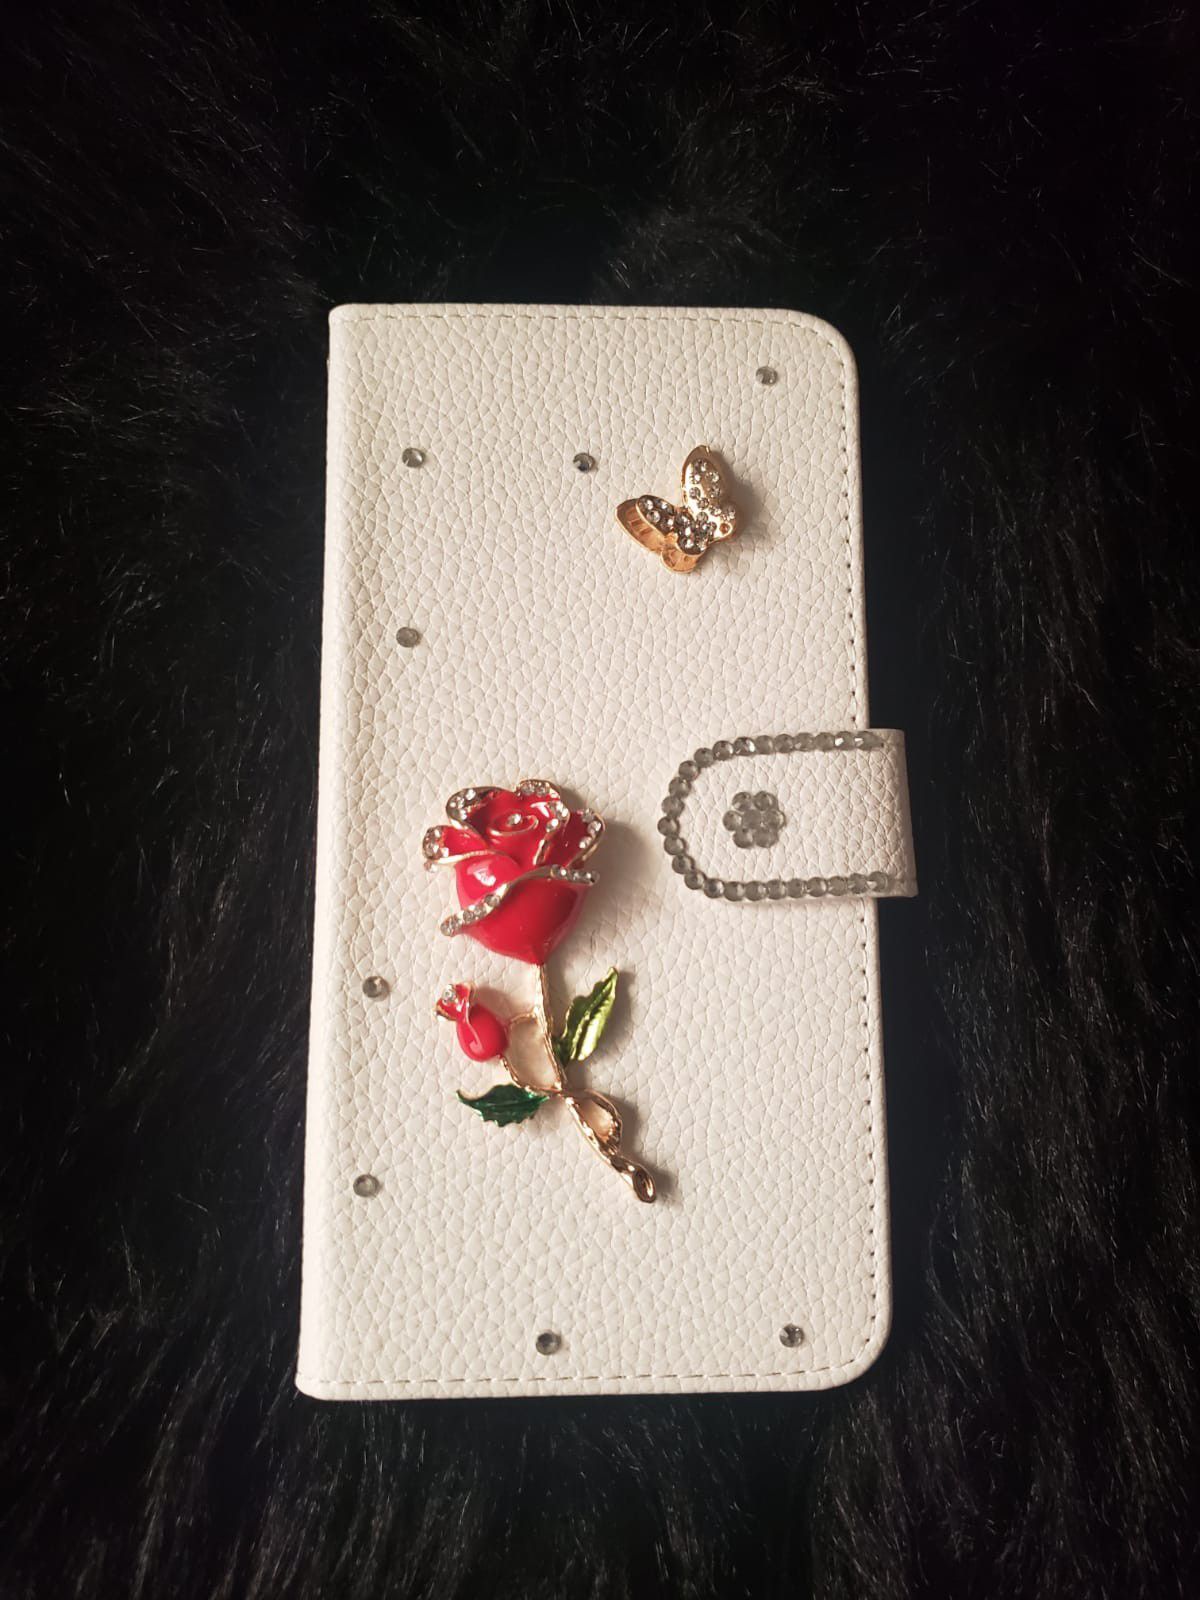 IPHONE OR SAMSUNG LEATHER CASE COVER